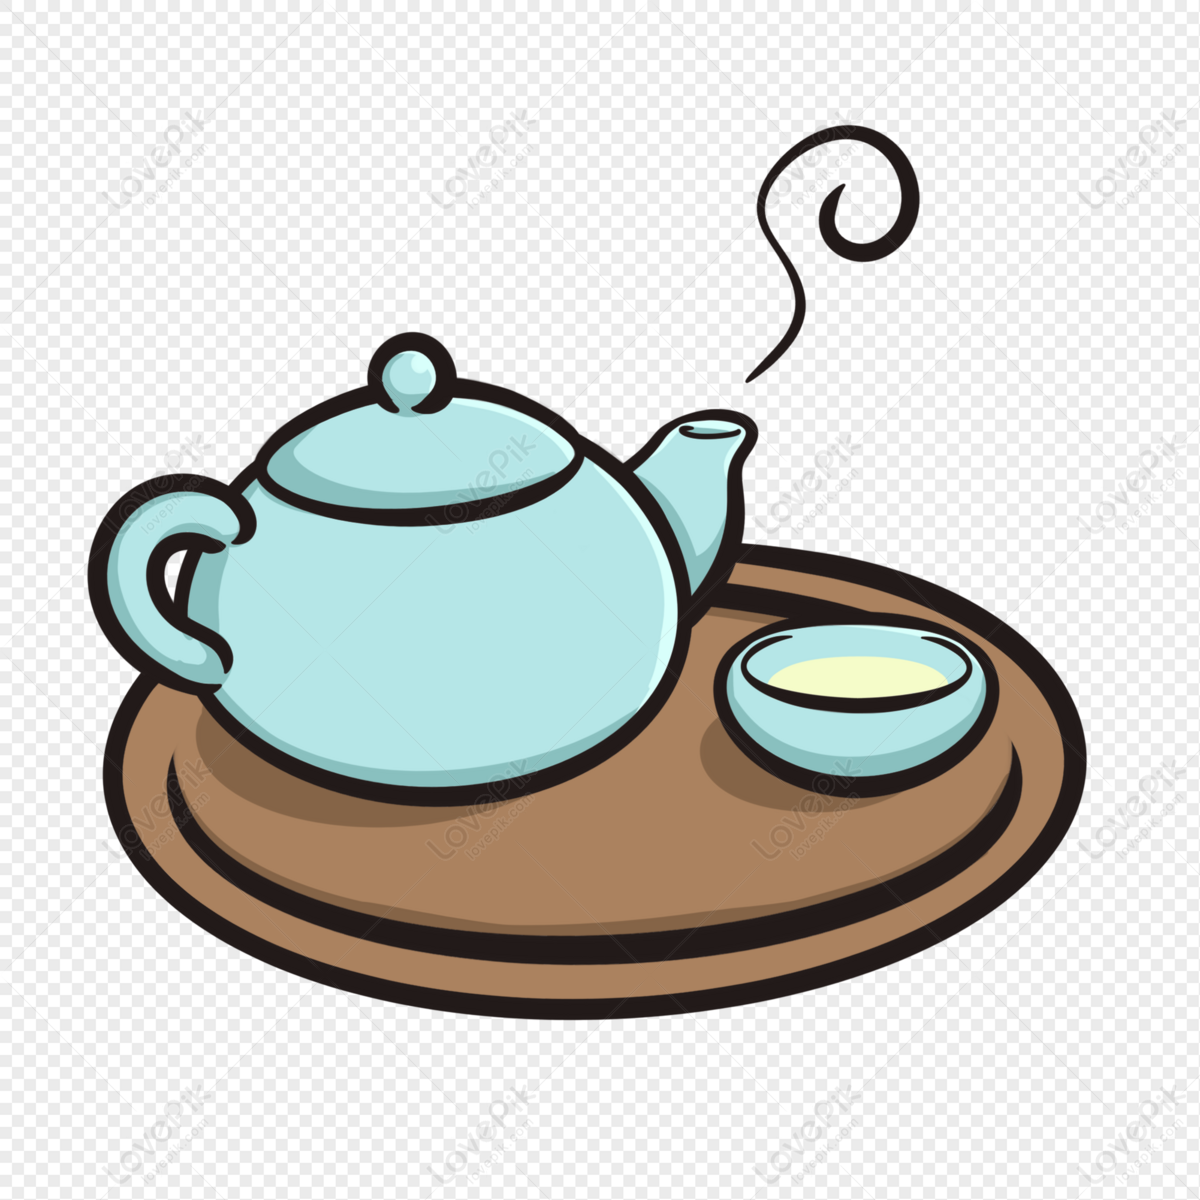 Tea Set Free PNG And Clipart Image For Free Download - Lovepik | 401566139